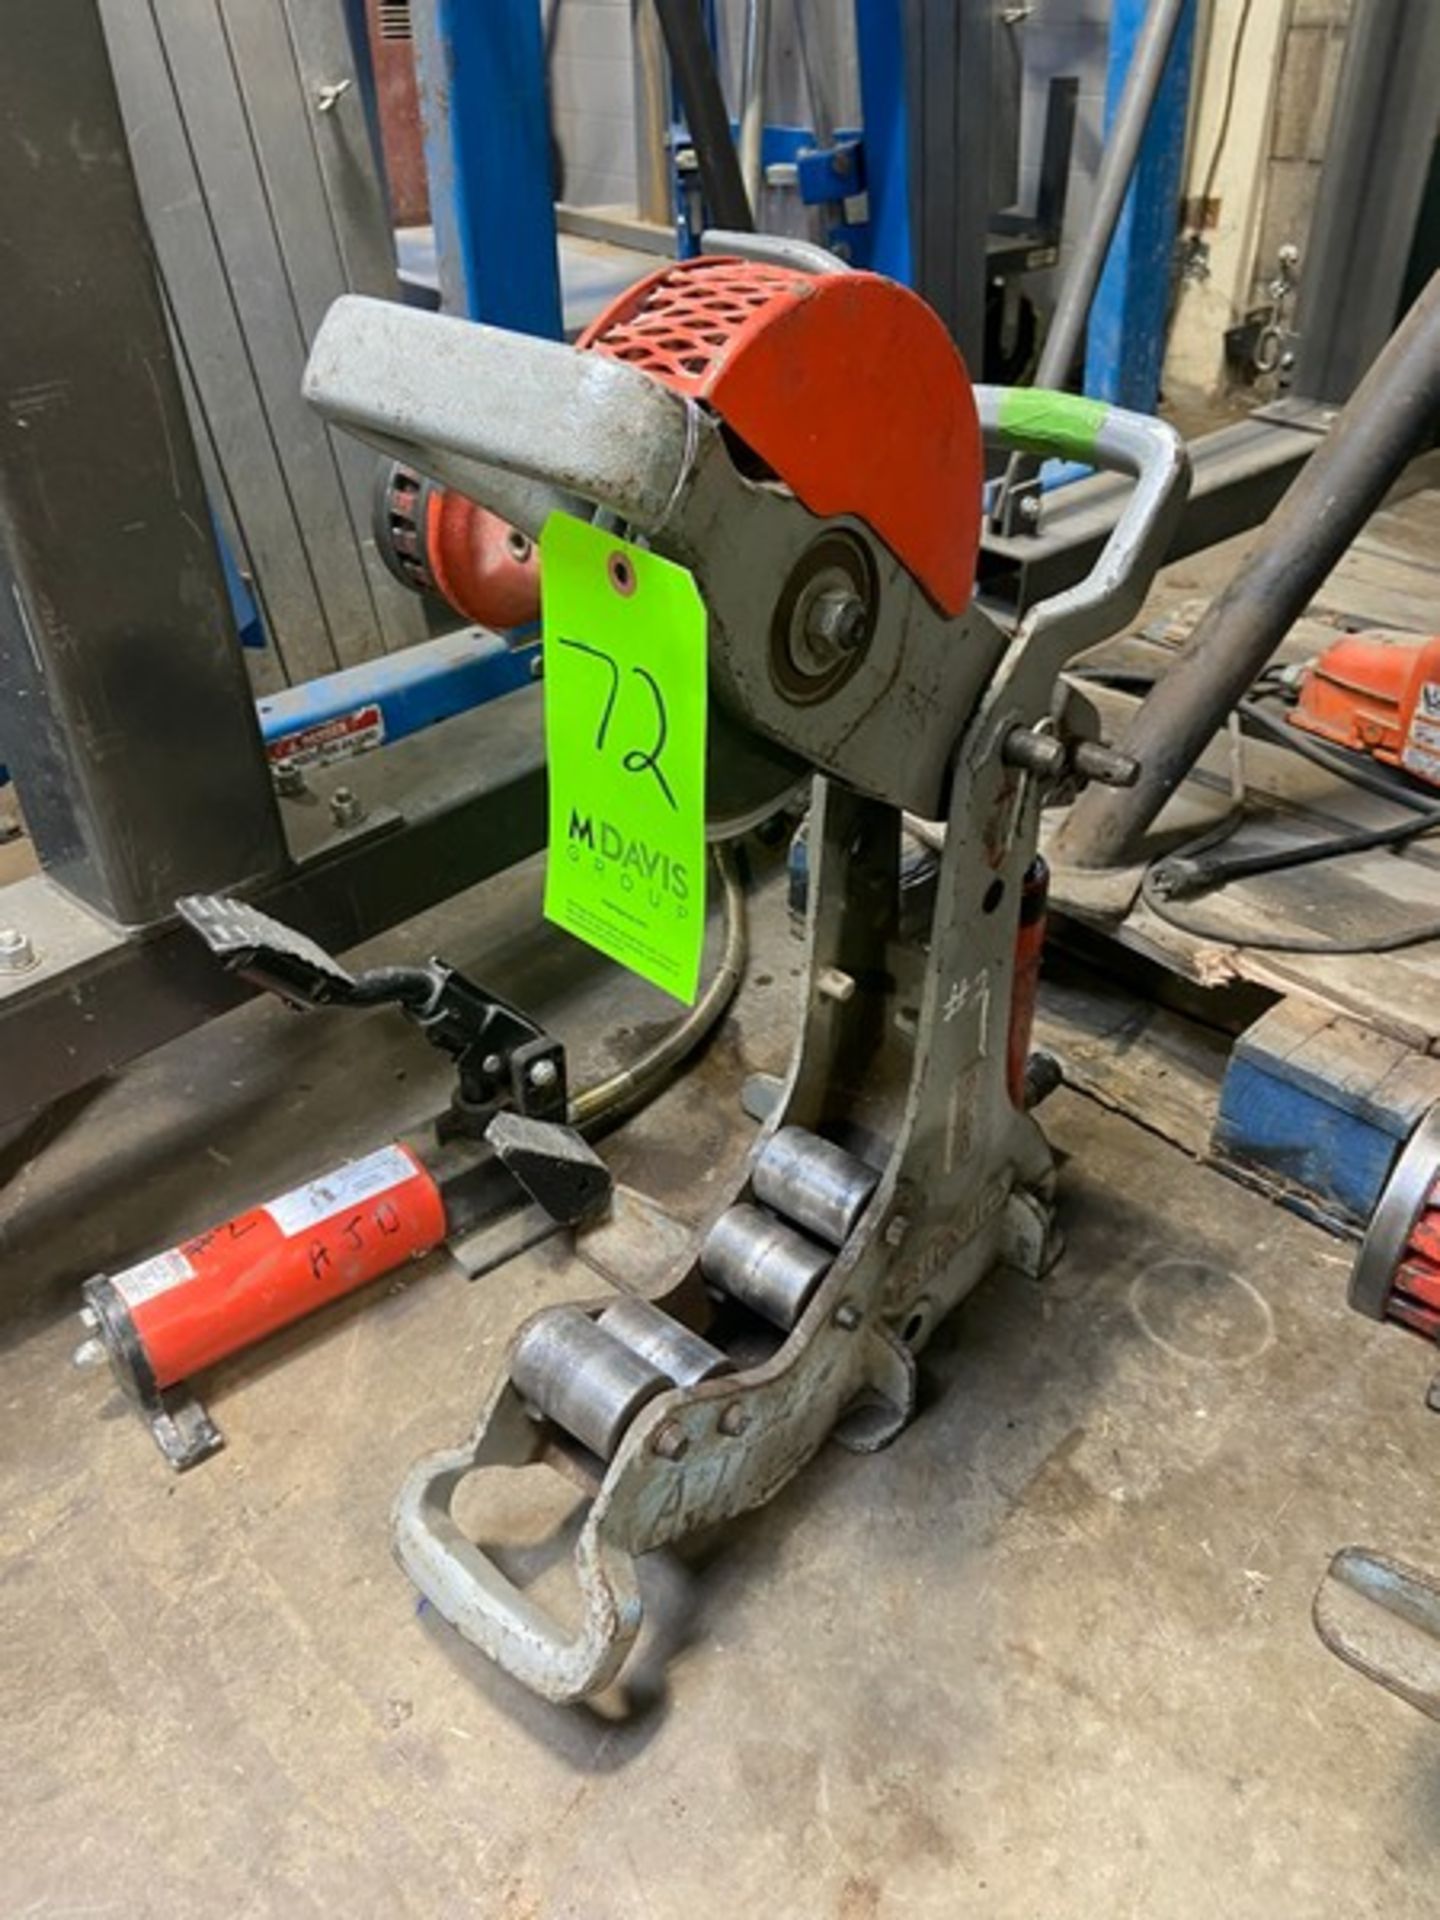 Ridgid 258 Pipe Cutter (LOCATED IN MONROEVILLE, PA)(RIGGING, LOADING, & SITE MANAGEMENT FEE: $100.